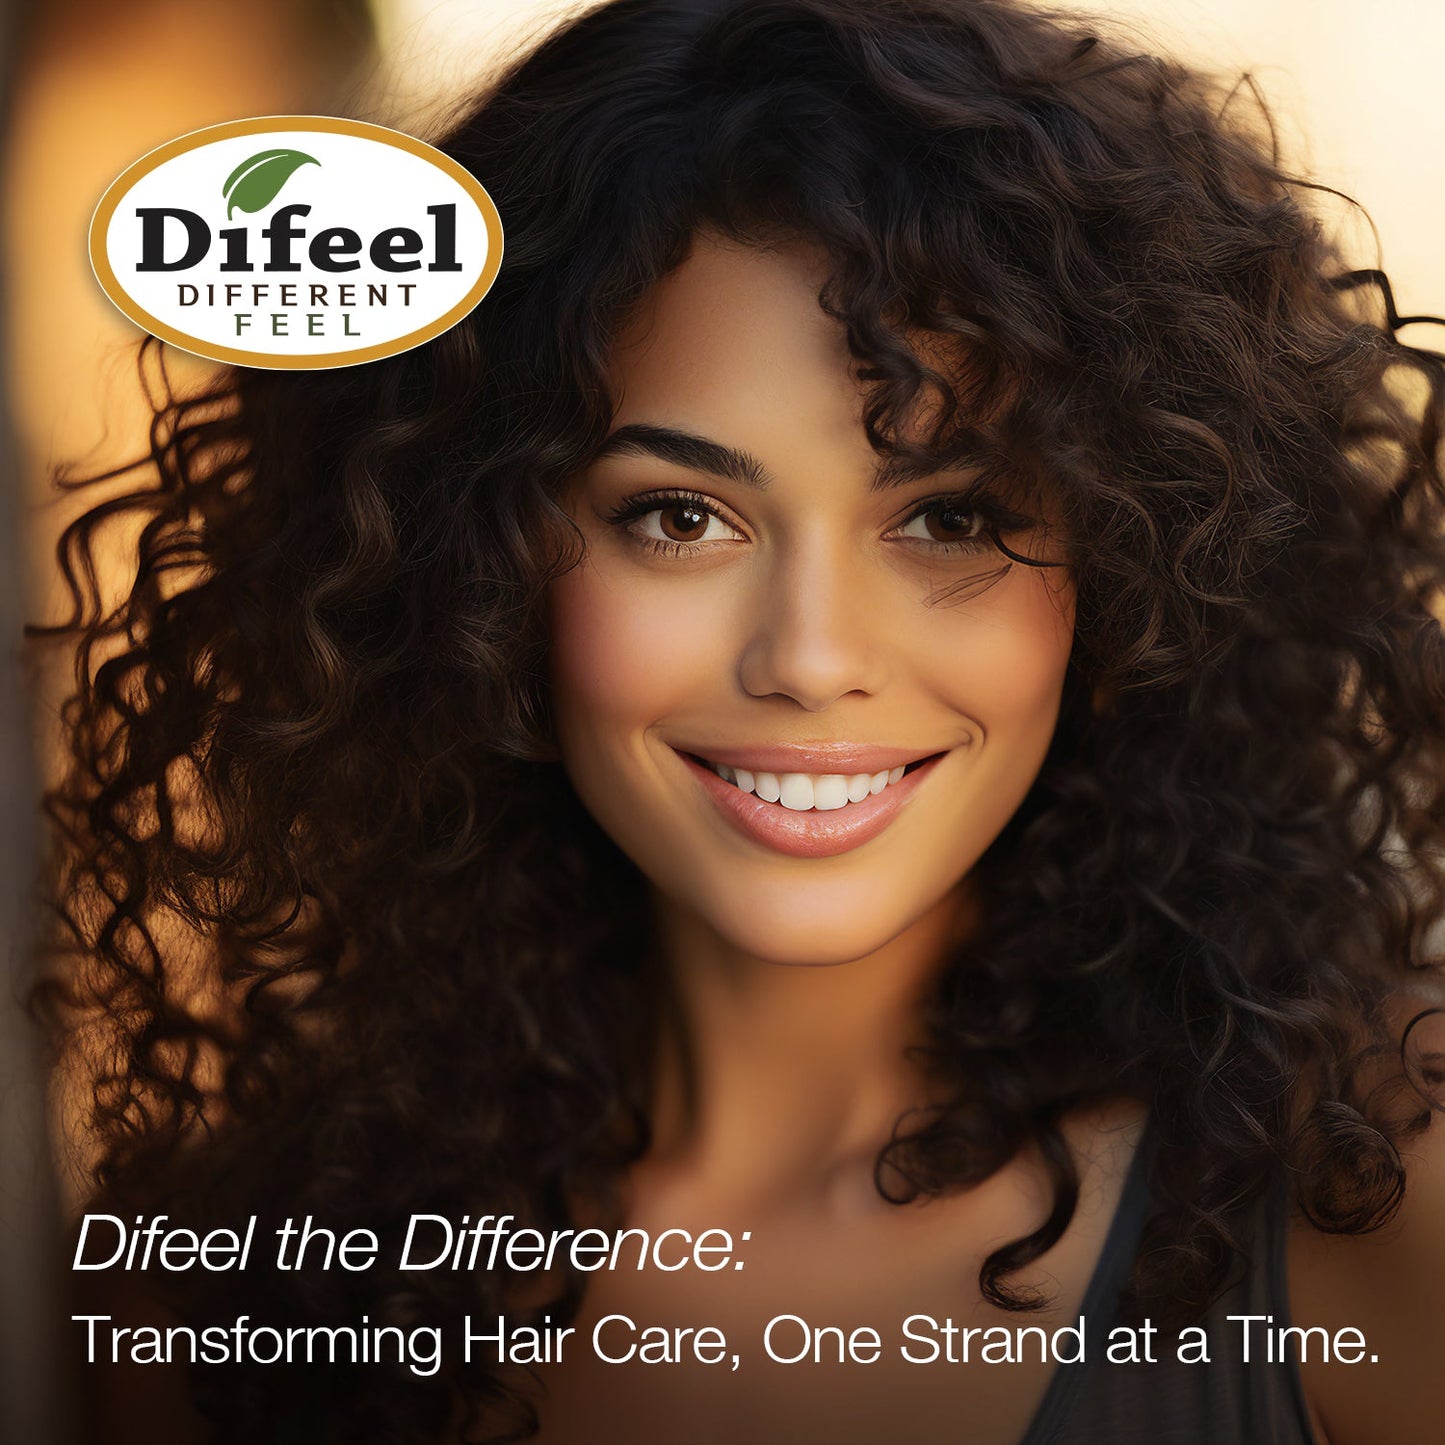 Difeel Biotin Pro-Growth Hair Mask 8 oz. by difeel - find your natural beauty